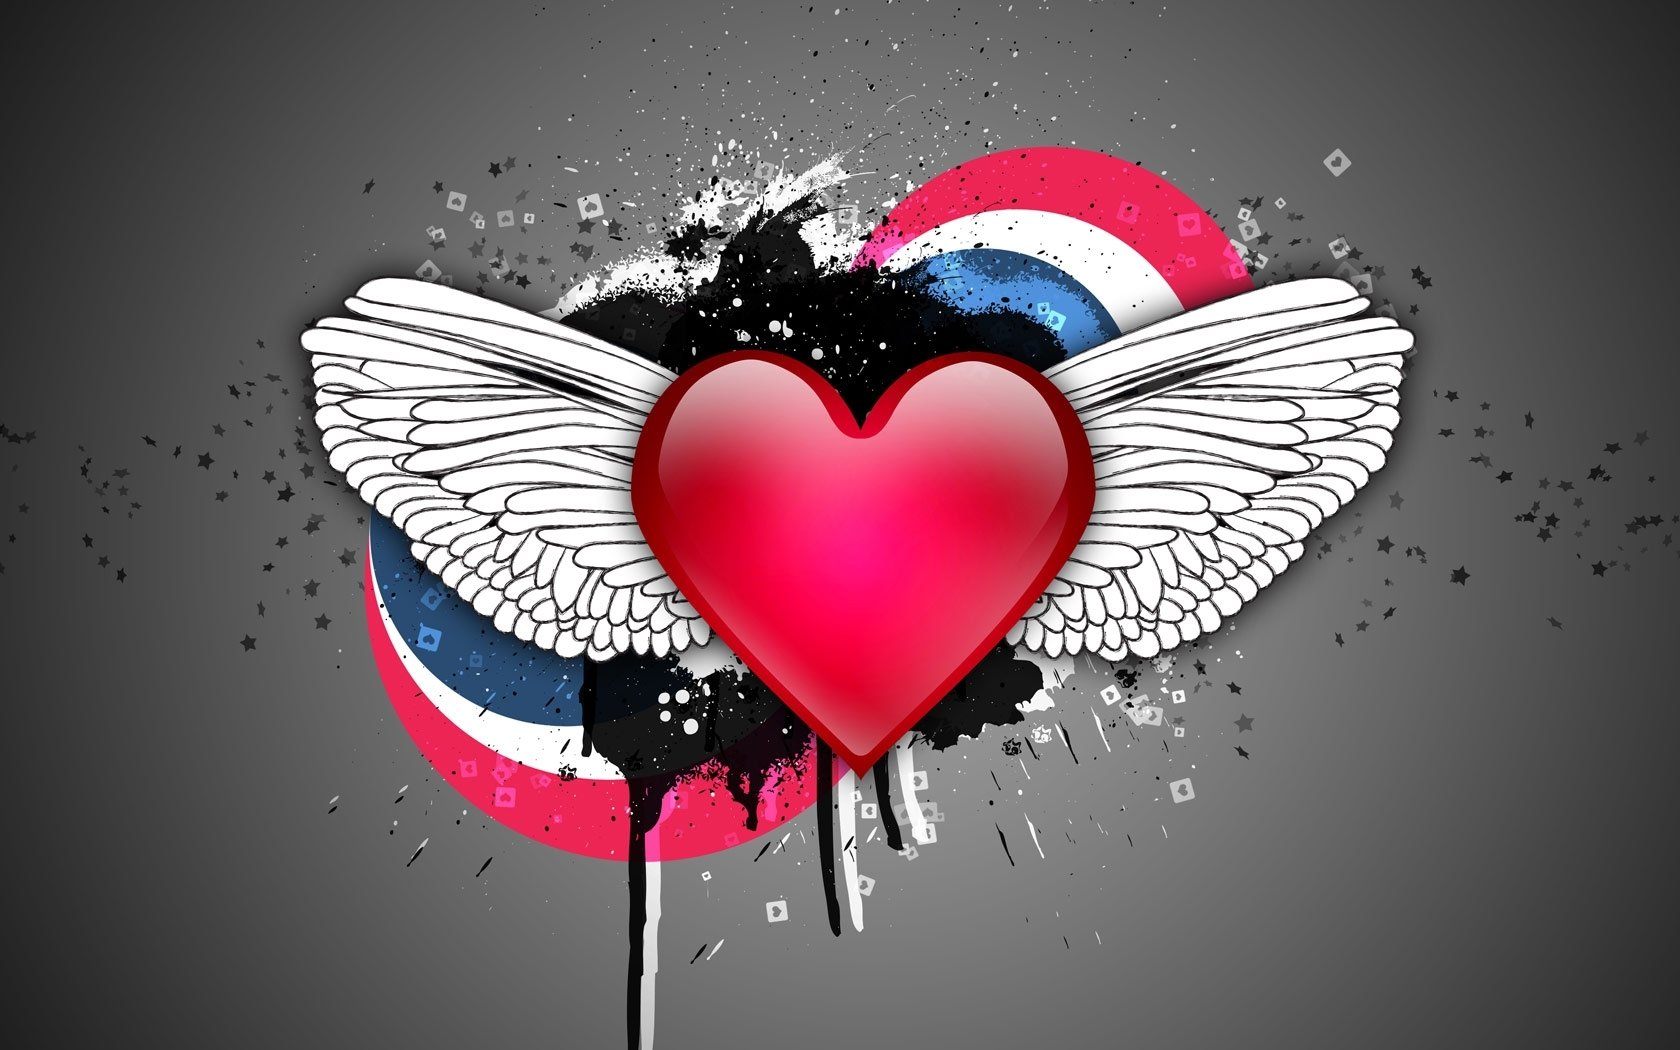 Artistic Heart with Wings Wallpaper and Background Imagex1050